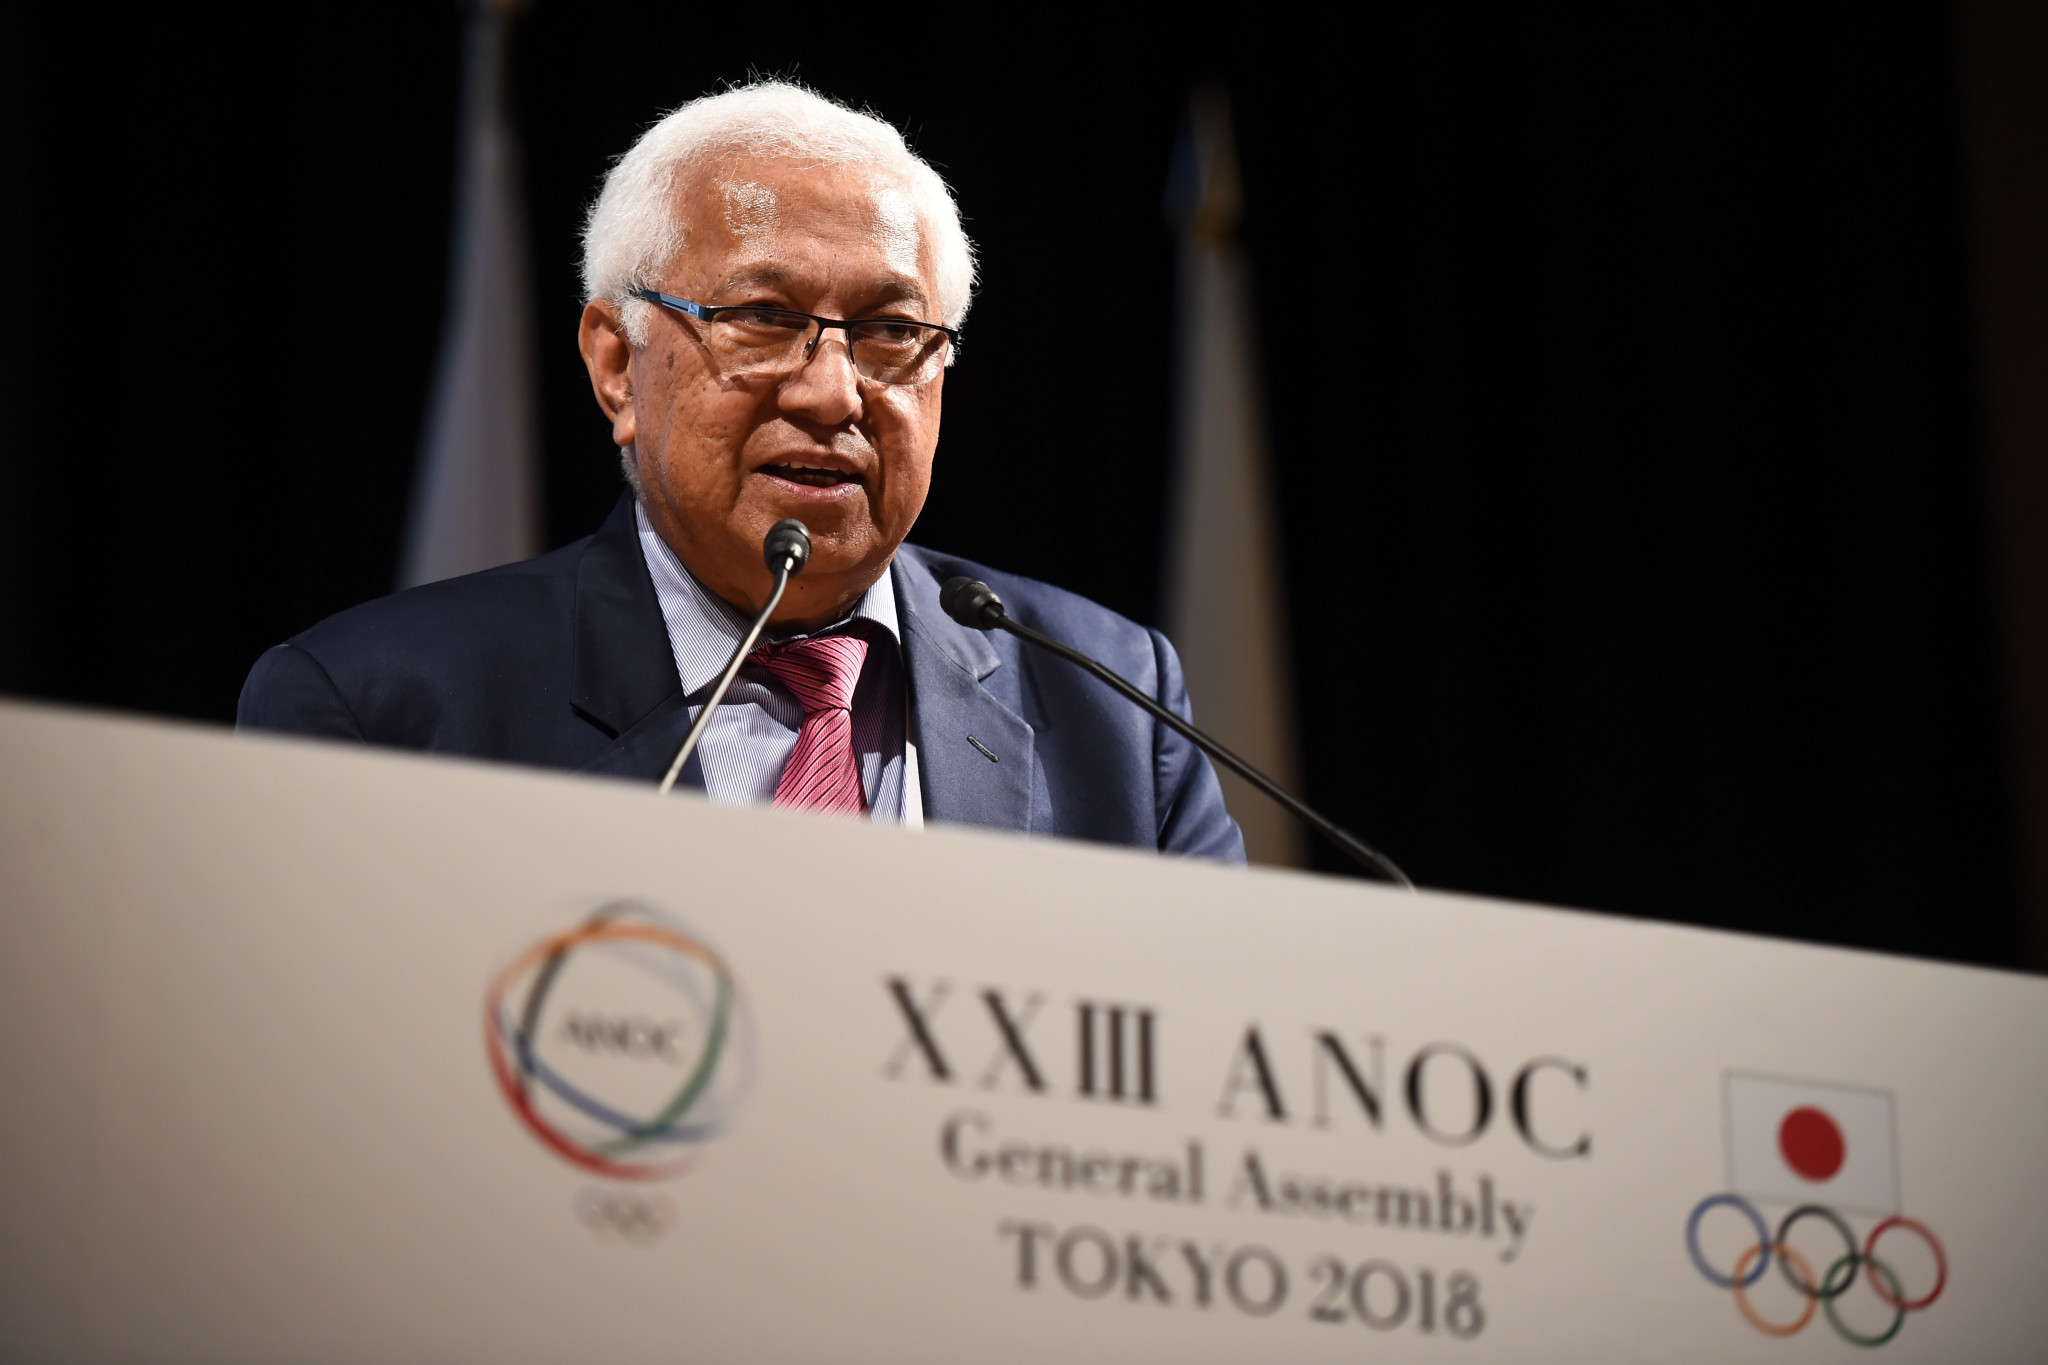 Robin Mitchell holds the interim Presidency of ANOC ©Getty Images